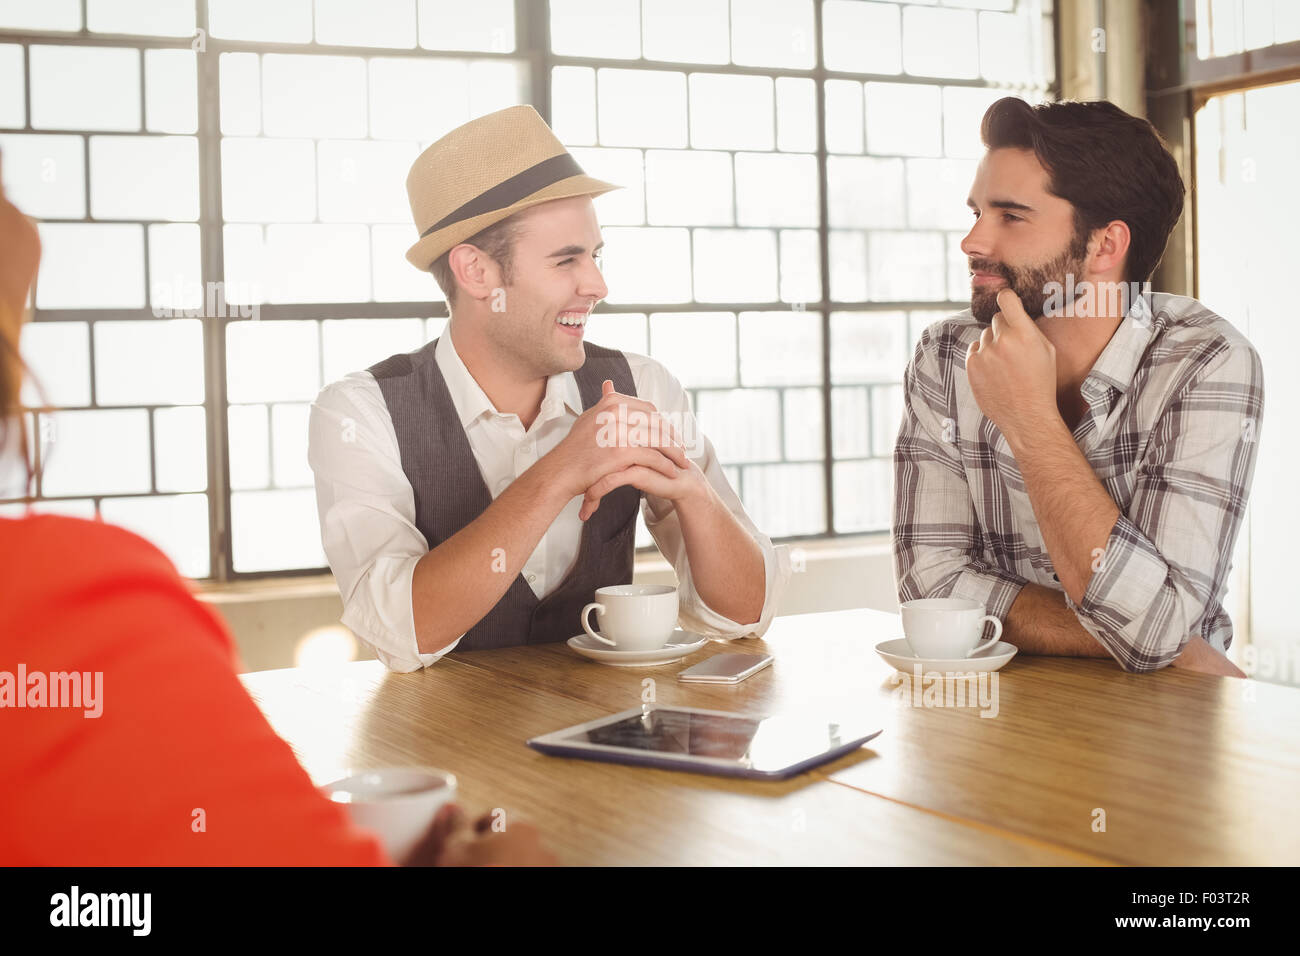 Smiling friends talking and having coffee together Stock Photo